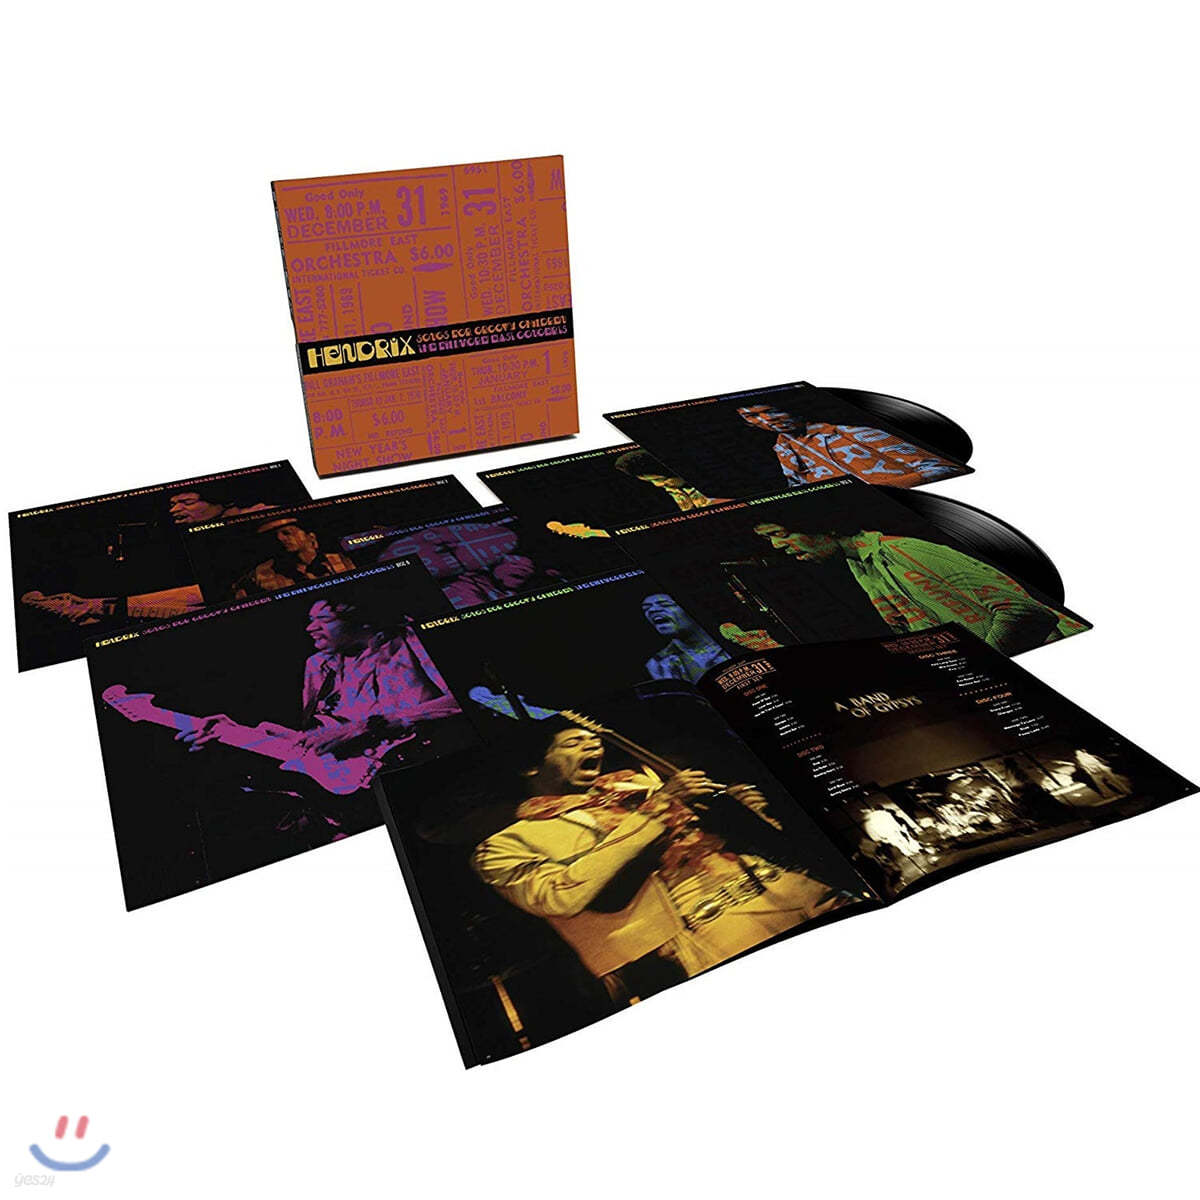 Jimi Hendrix (지미 헨드릭스) - Songs For Groovy Children: The Fillmore East Concerts [8LP 박스 세트]